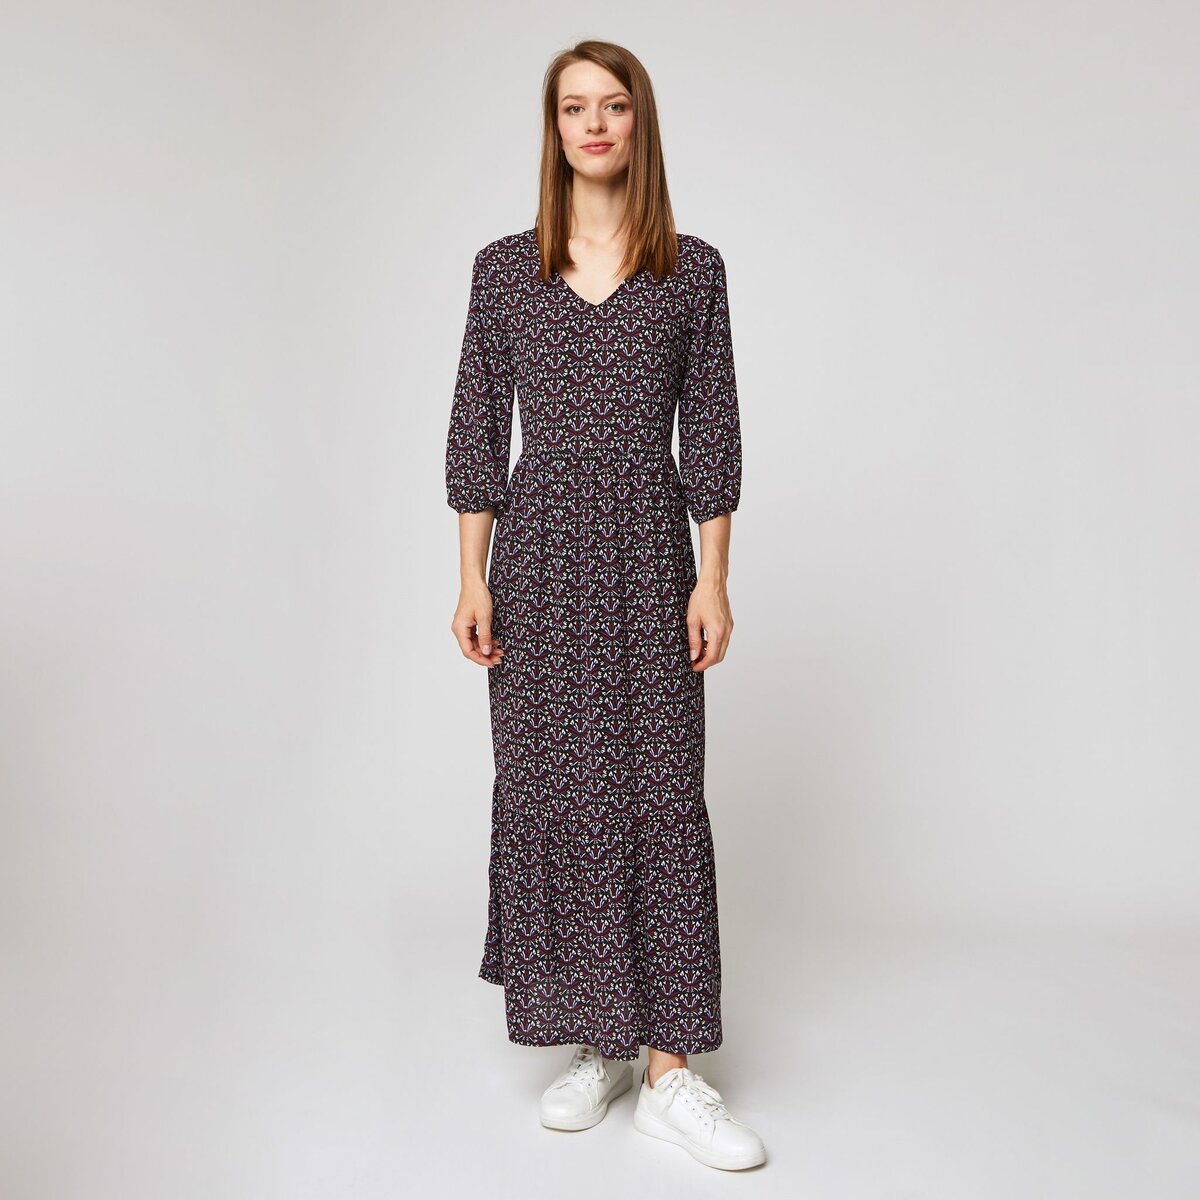 INEXTENSO Robe longues manches 3/4 femme